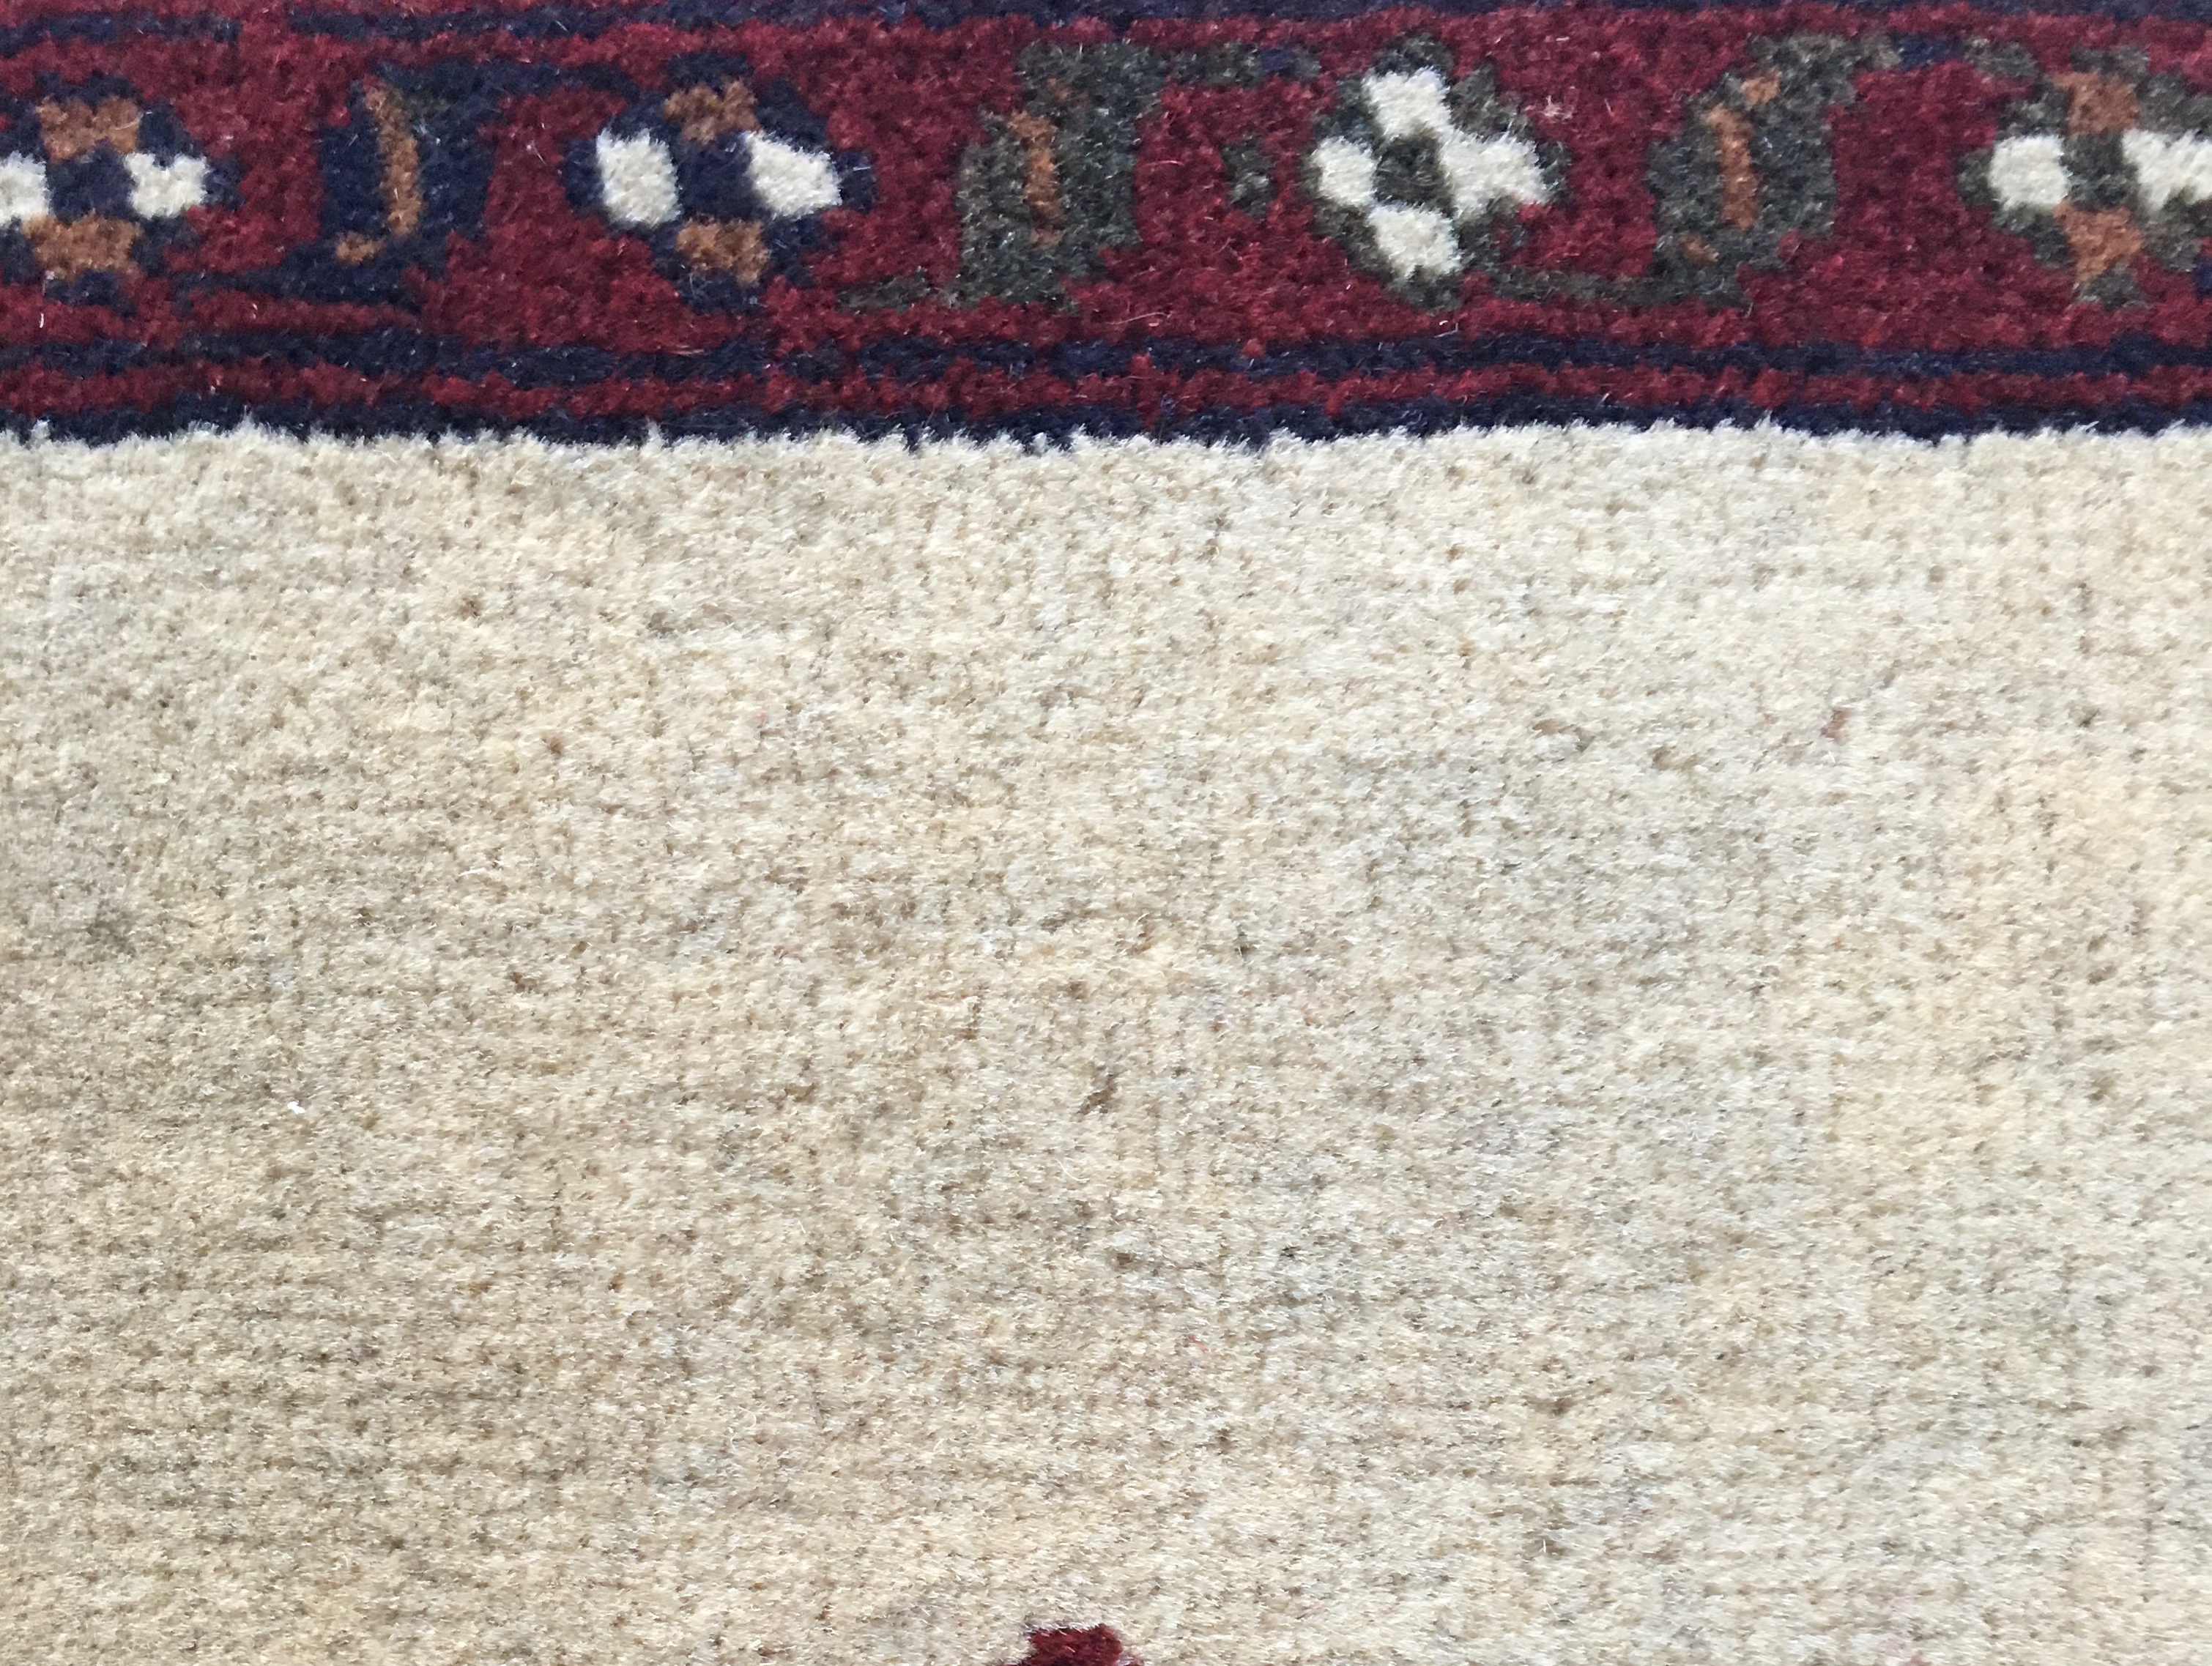 Detail of rug's top border, which includes a floral motif